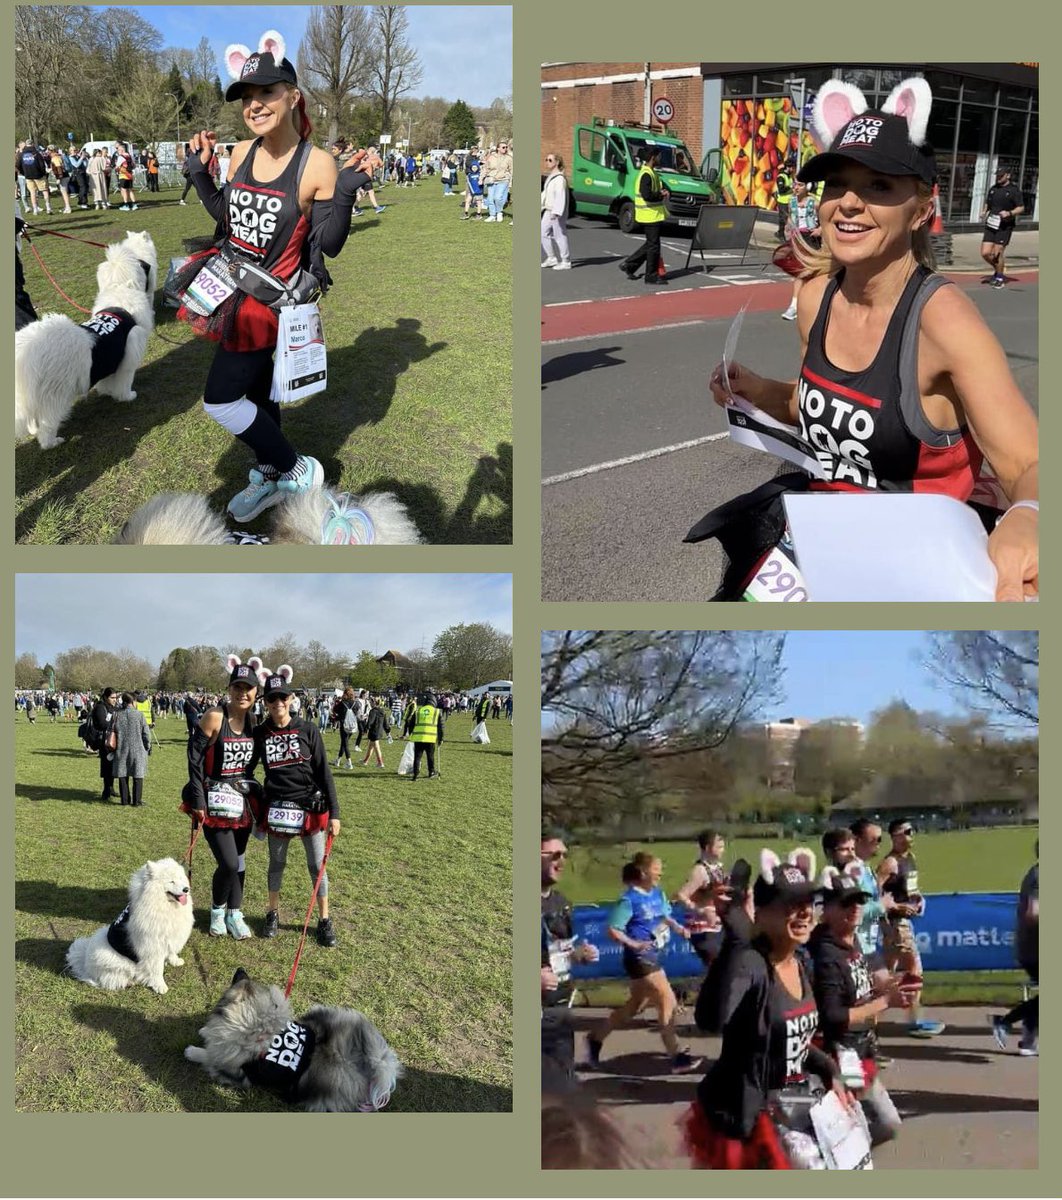 #brightonmarathon #brightonmarathonweekend Nikki and Michelle are proudly representing #notodogmeat carrying the posters of every mile dedicated to our survivors. If you make it down to Brighton UK today please show them some love. #share #dogmeattradesurvivor #press